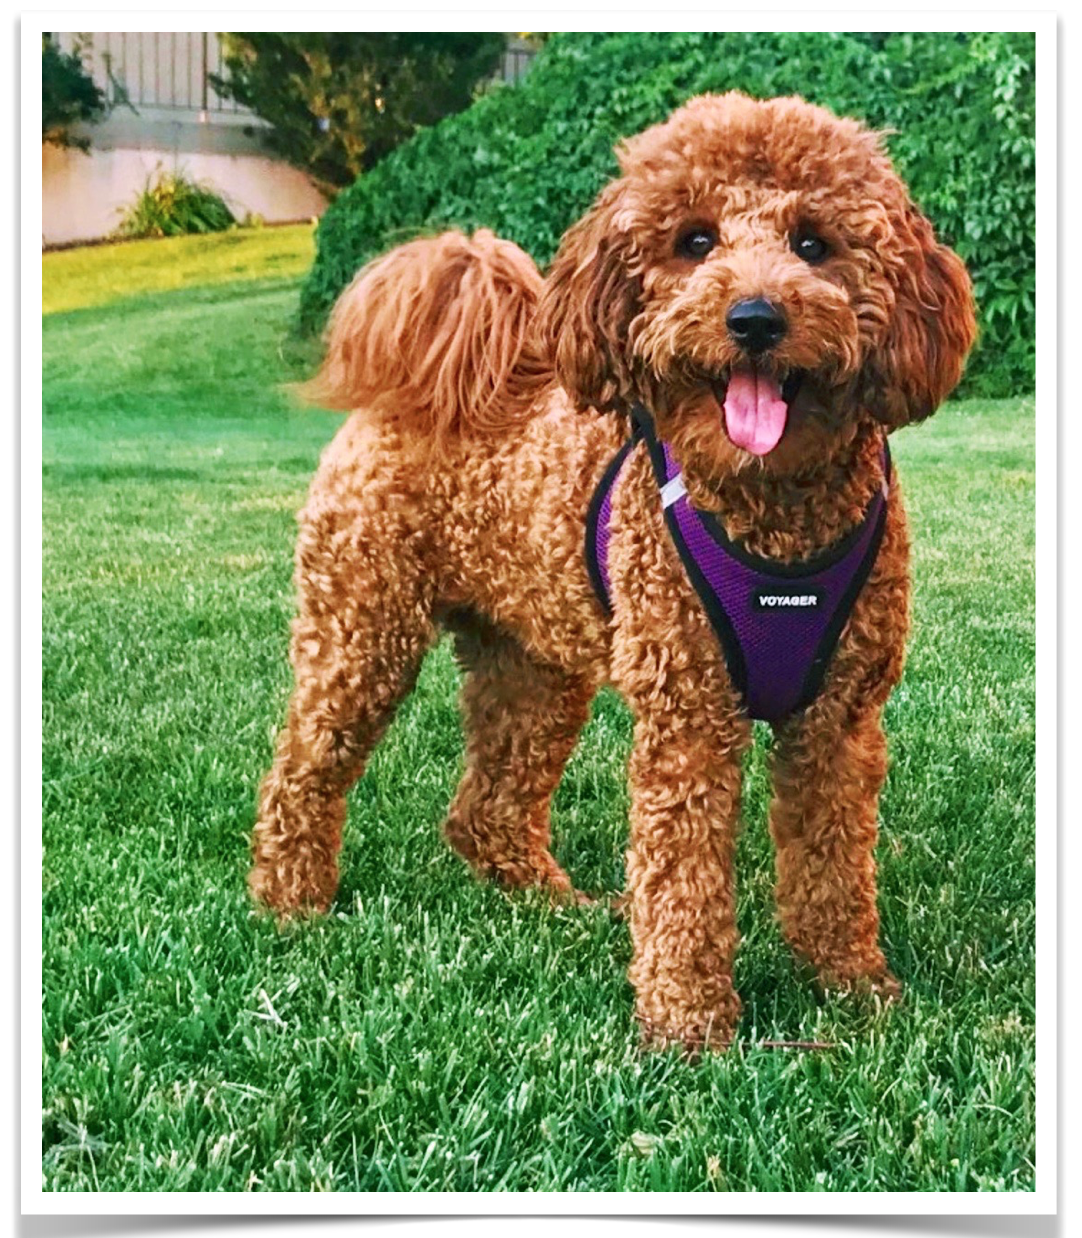 Ruby is our retired Goldendoodle mama, she is a red goldendoodle, she is an English Goldendoodle, she is bred with Harry our multi-generational tuxedo goldendoodle stud.